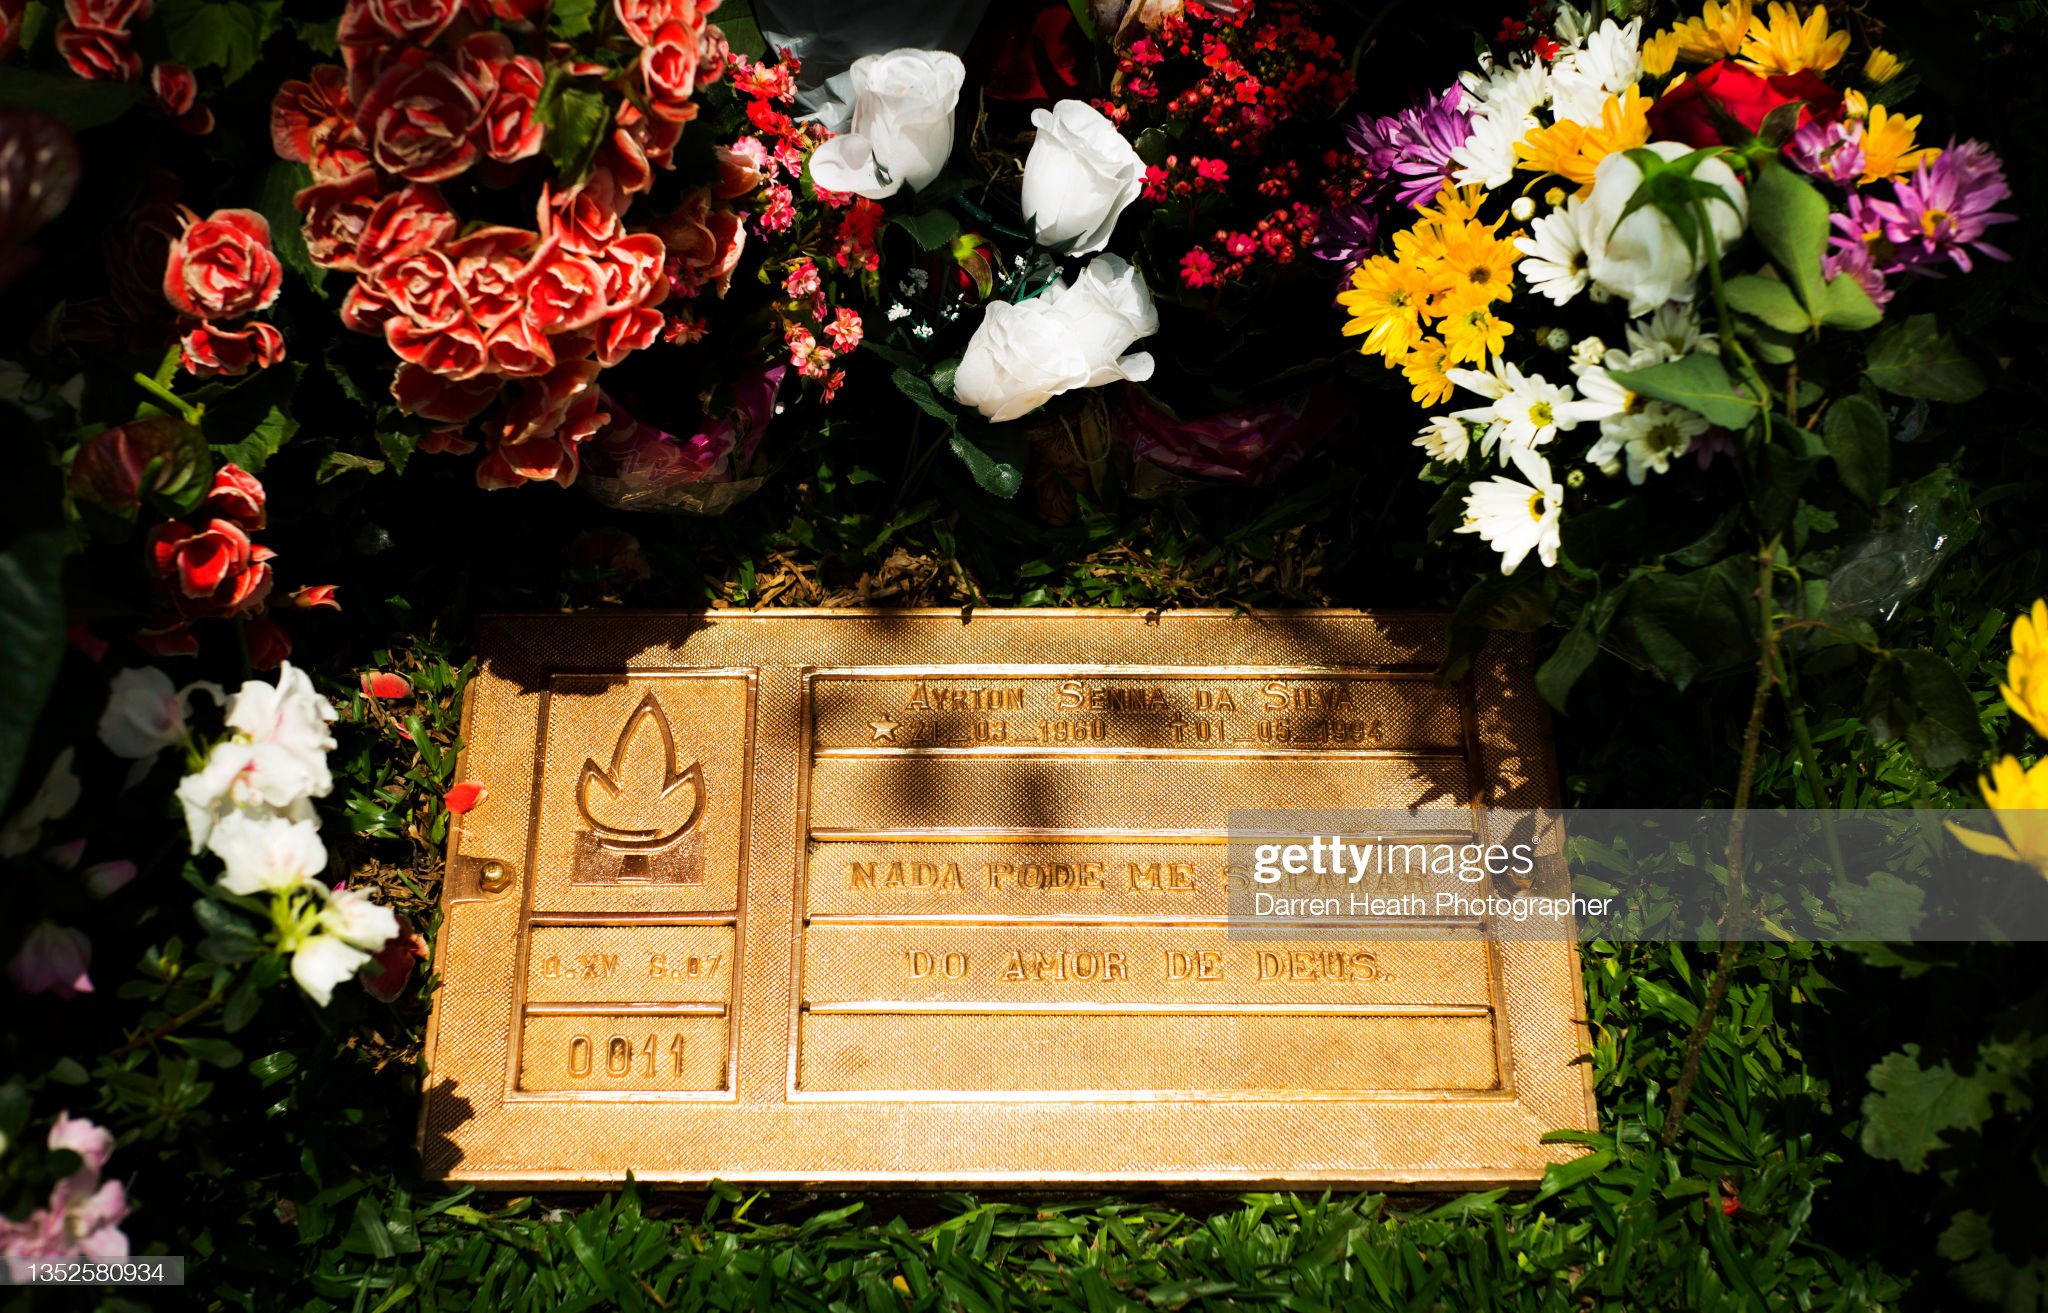 The plaque positioned on the grave of Ayrton Senna surrounded by flowers in the Morumbi Cemetry during the weekend of the Brazilian Grand Prix, Autódromo José Carlos Pace, São Paulo, Brazil, on the 21st November 2013.